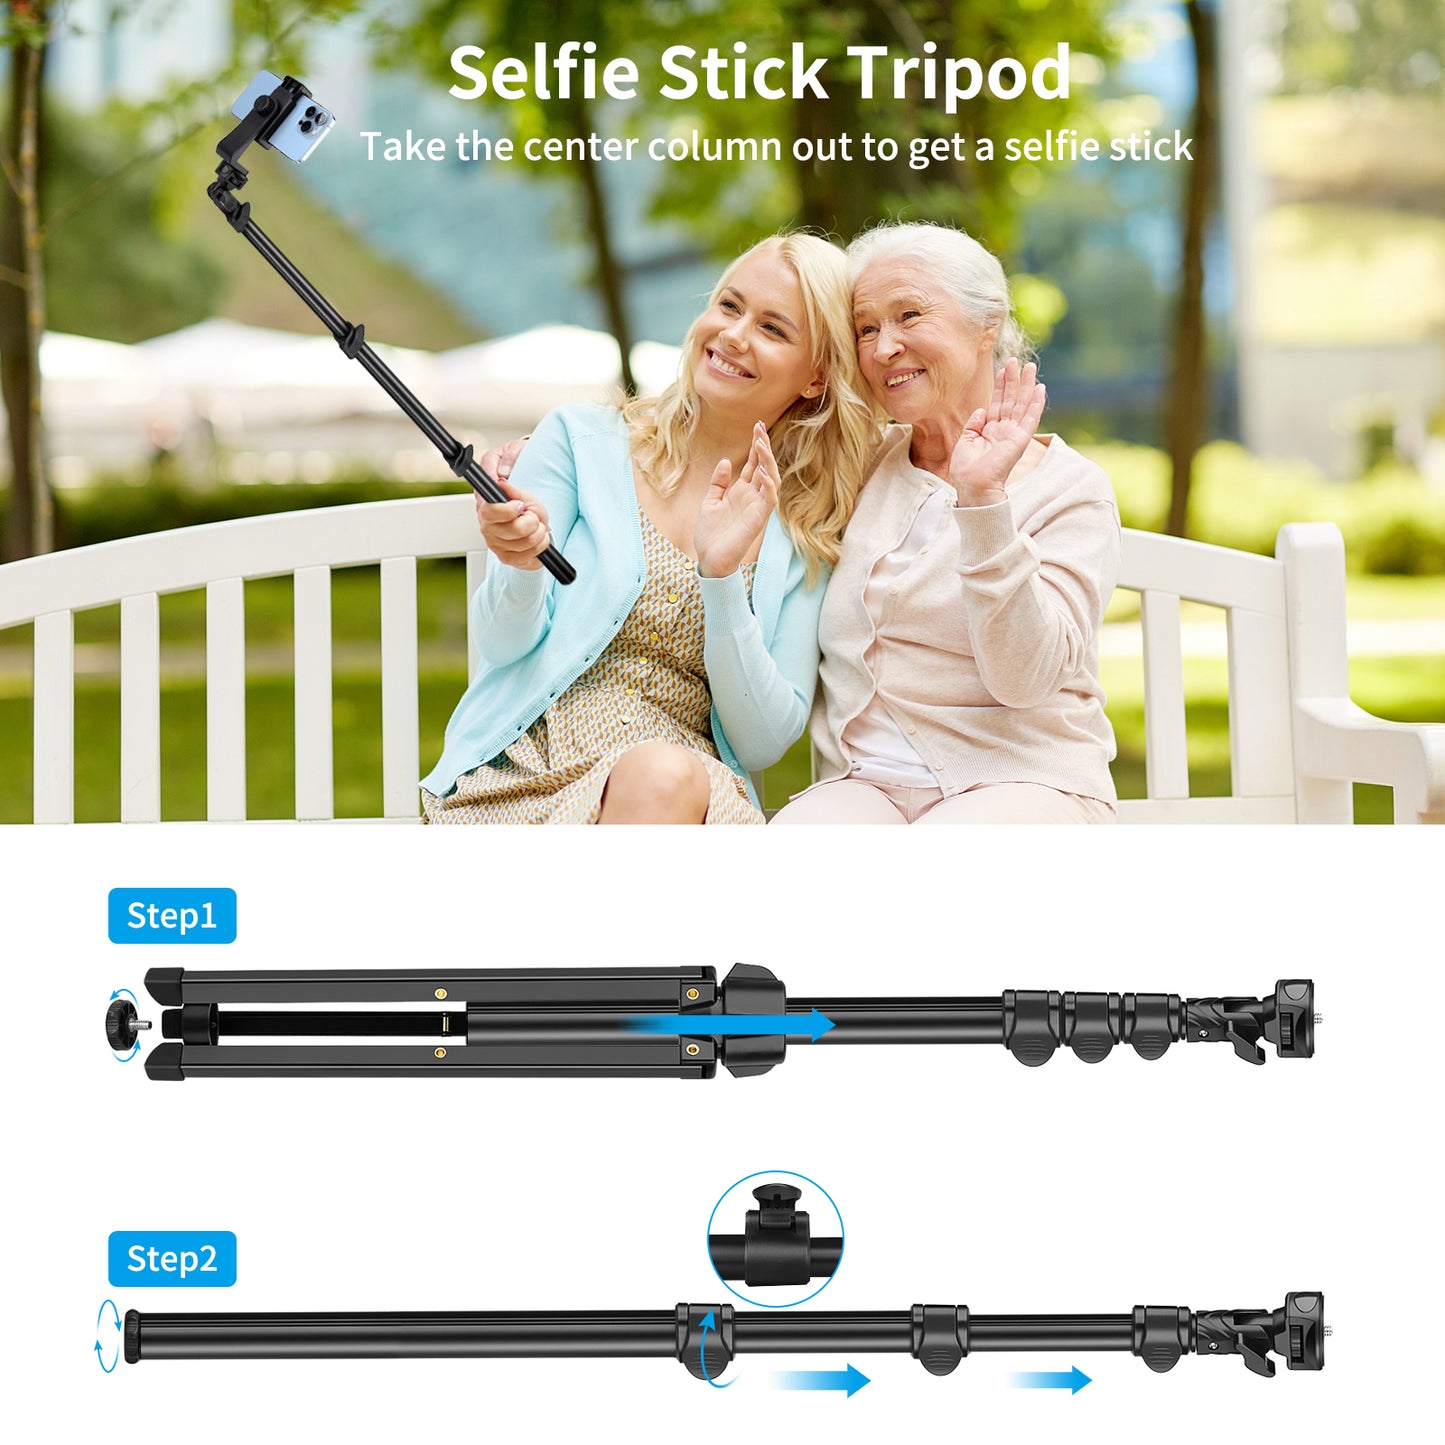 JOILCAN 56" Phone Tripod for iPhone, Aluminum Selfie Stick Tripod with Wireless Remote Control & Phone Holder, Extendable Tripod for Smartphone, Compatible with iPhone & Android Phones, DSLR Camera(EU)